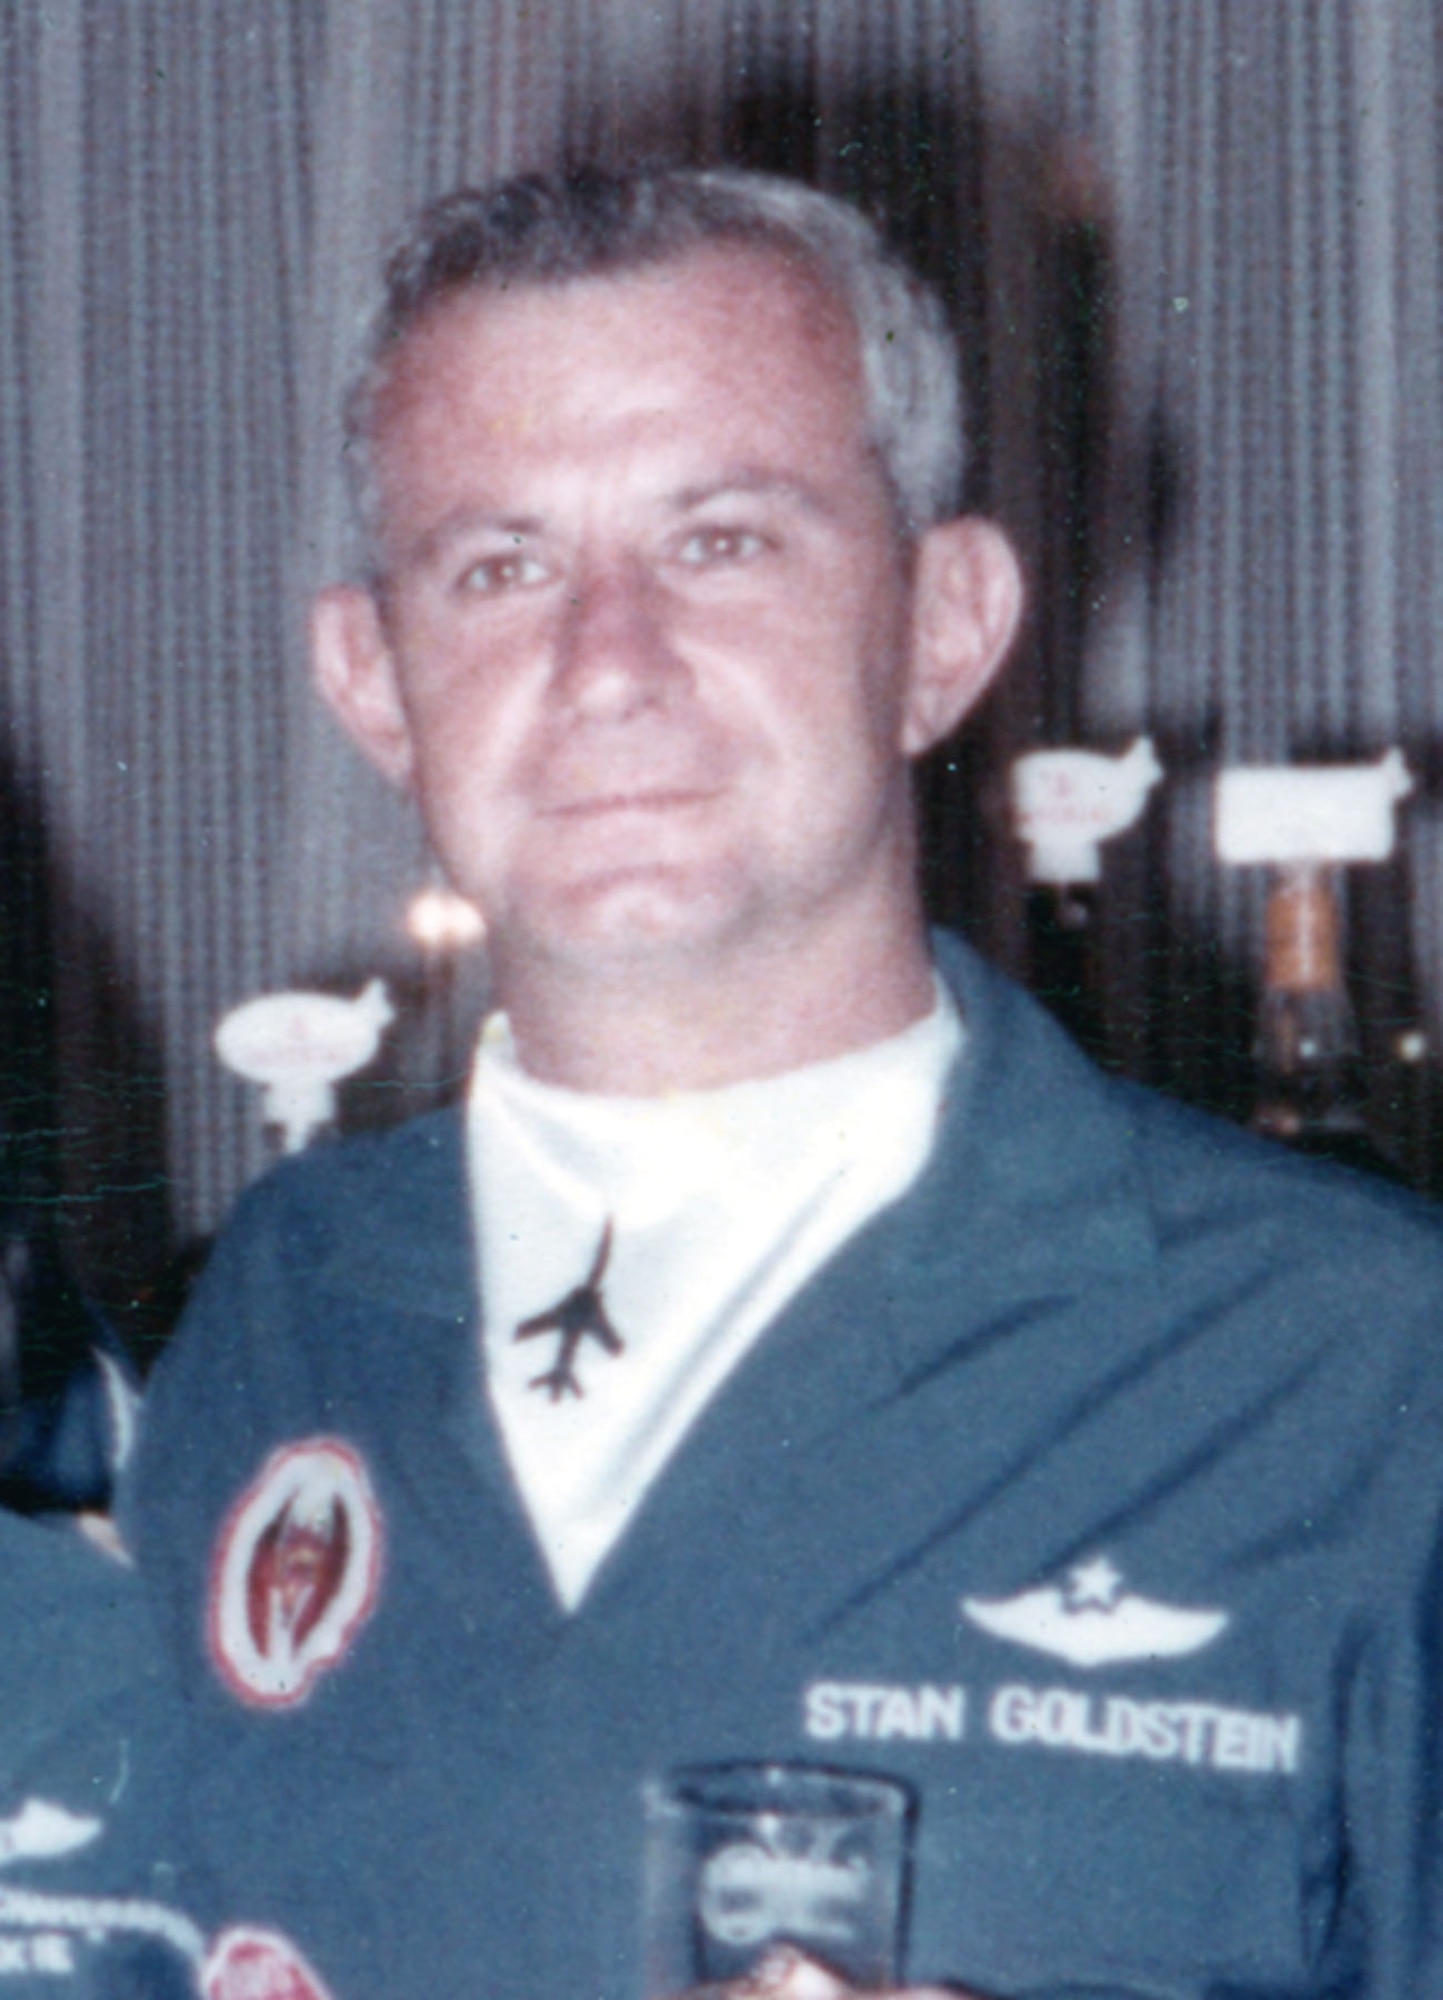 Goldstein in his party suit. (U.S. Air Force photo)